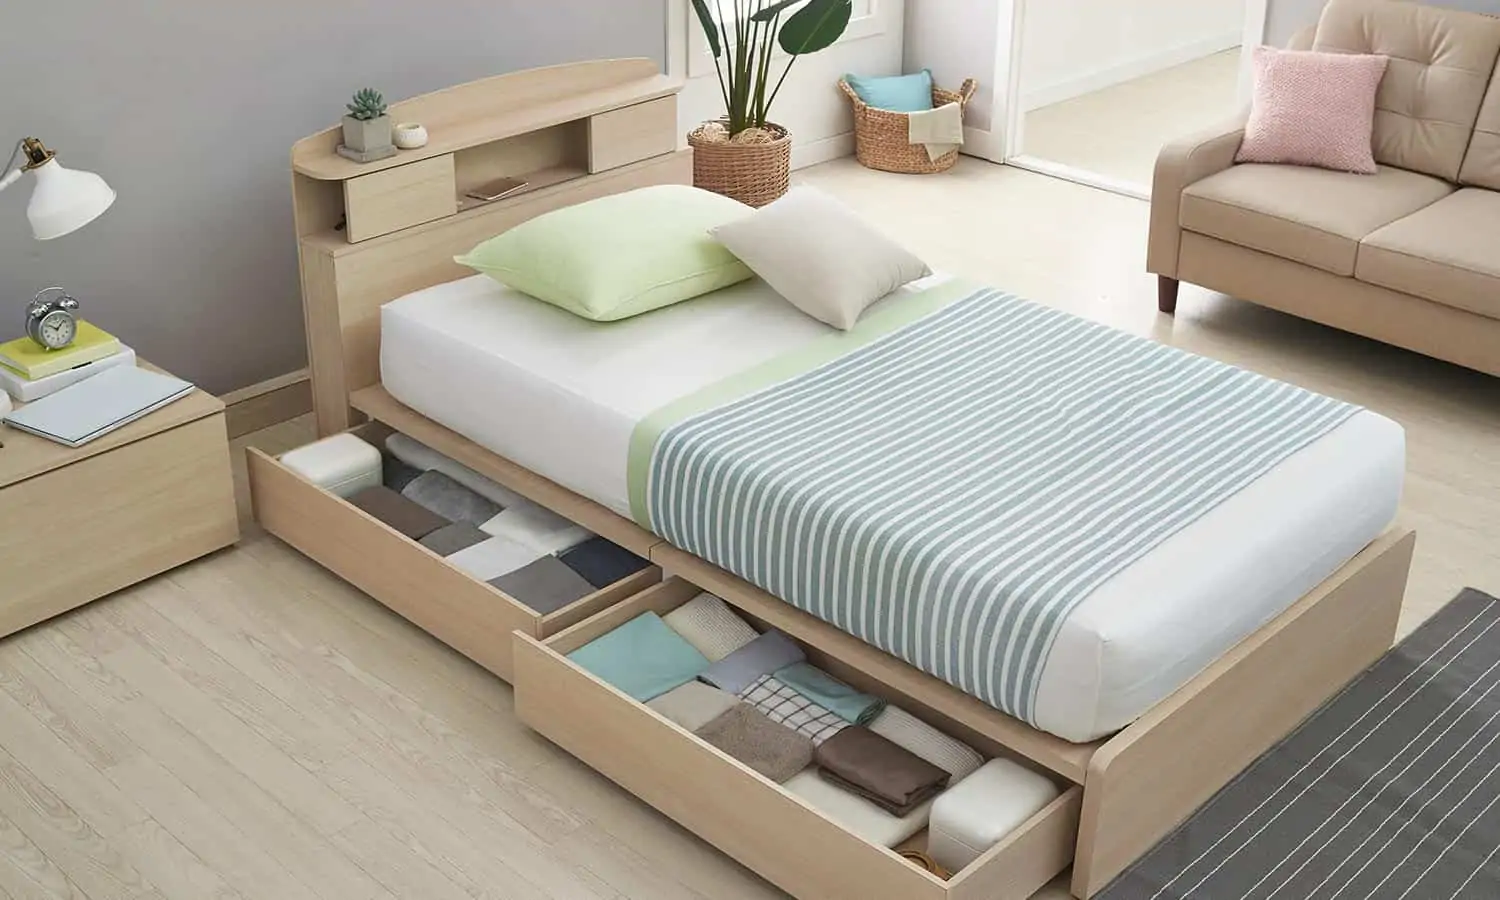  light stained wood storage bed design with drawers